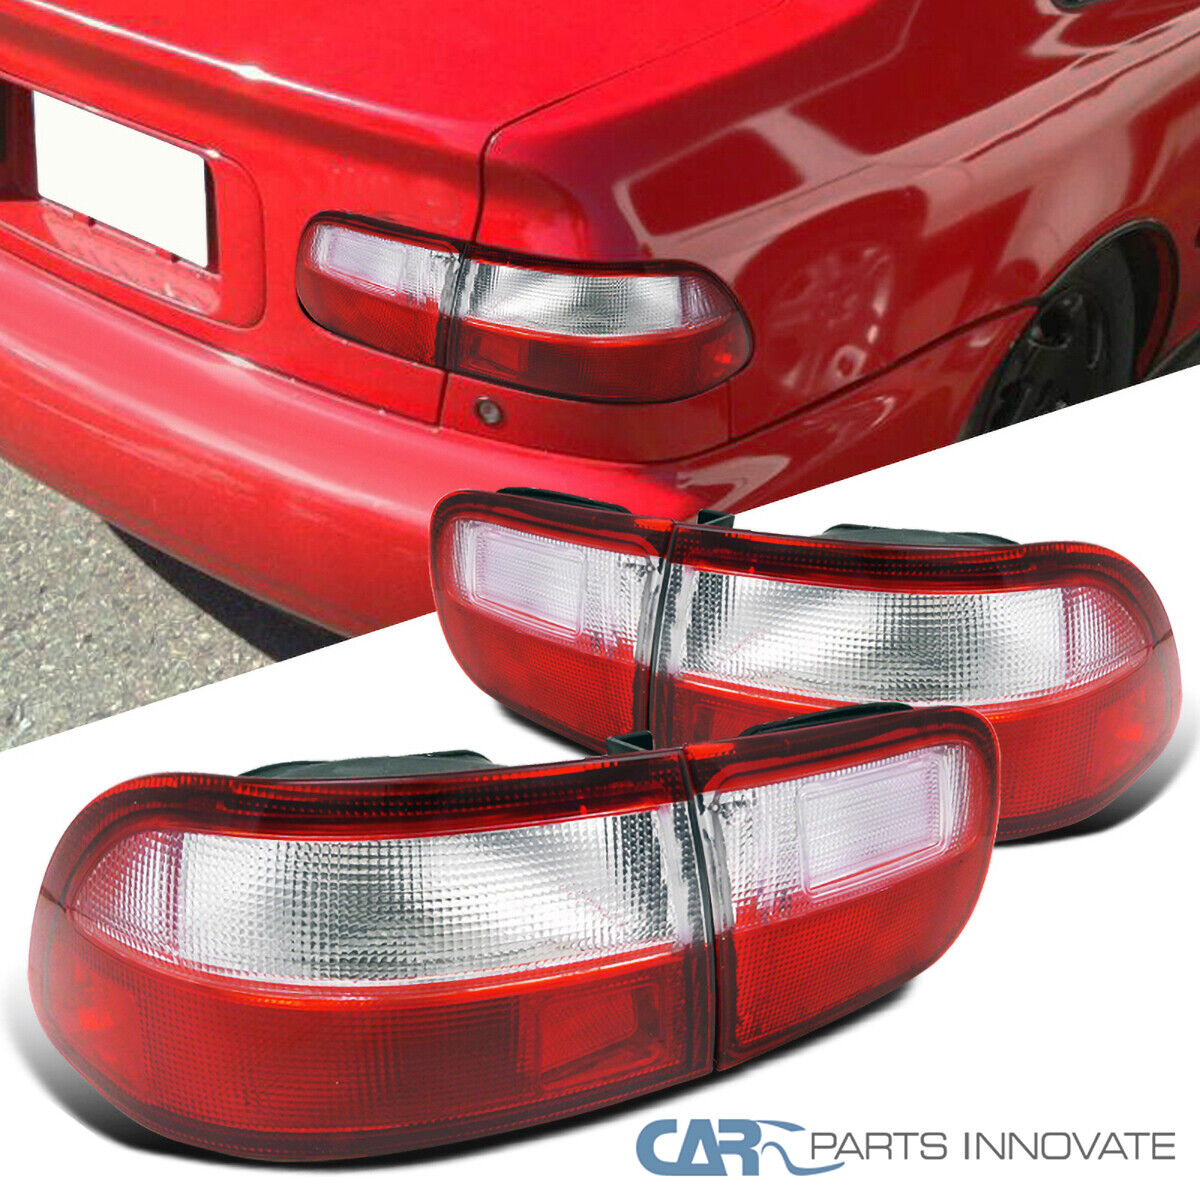 Fits 92-95 Honda Civic 2/4Dr Coupe Sedan Red/Clear Tail Lights Rear Brake Lamps